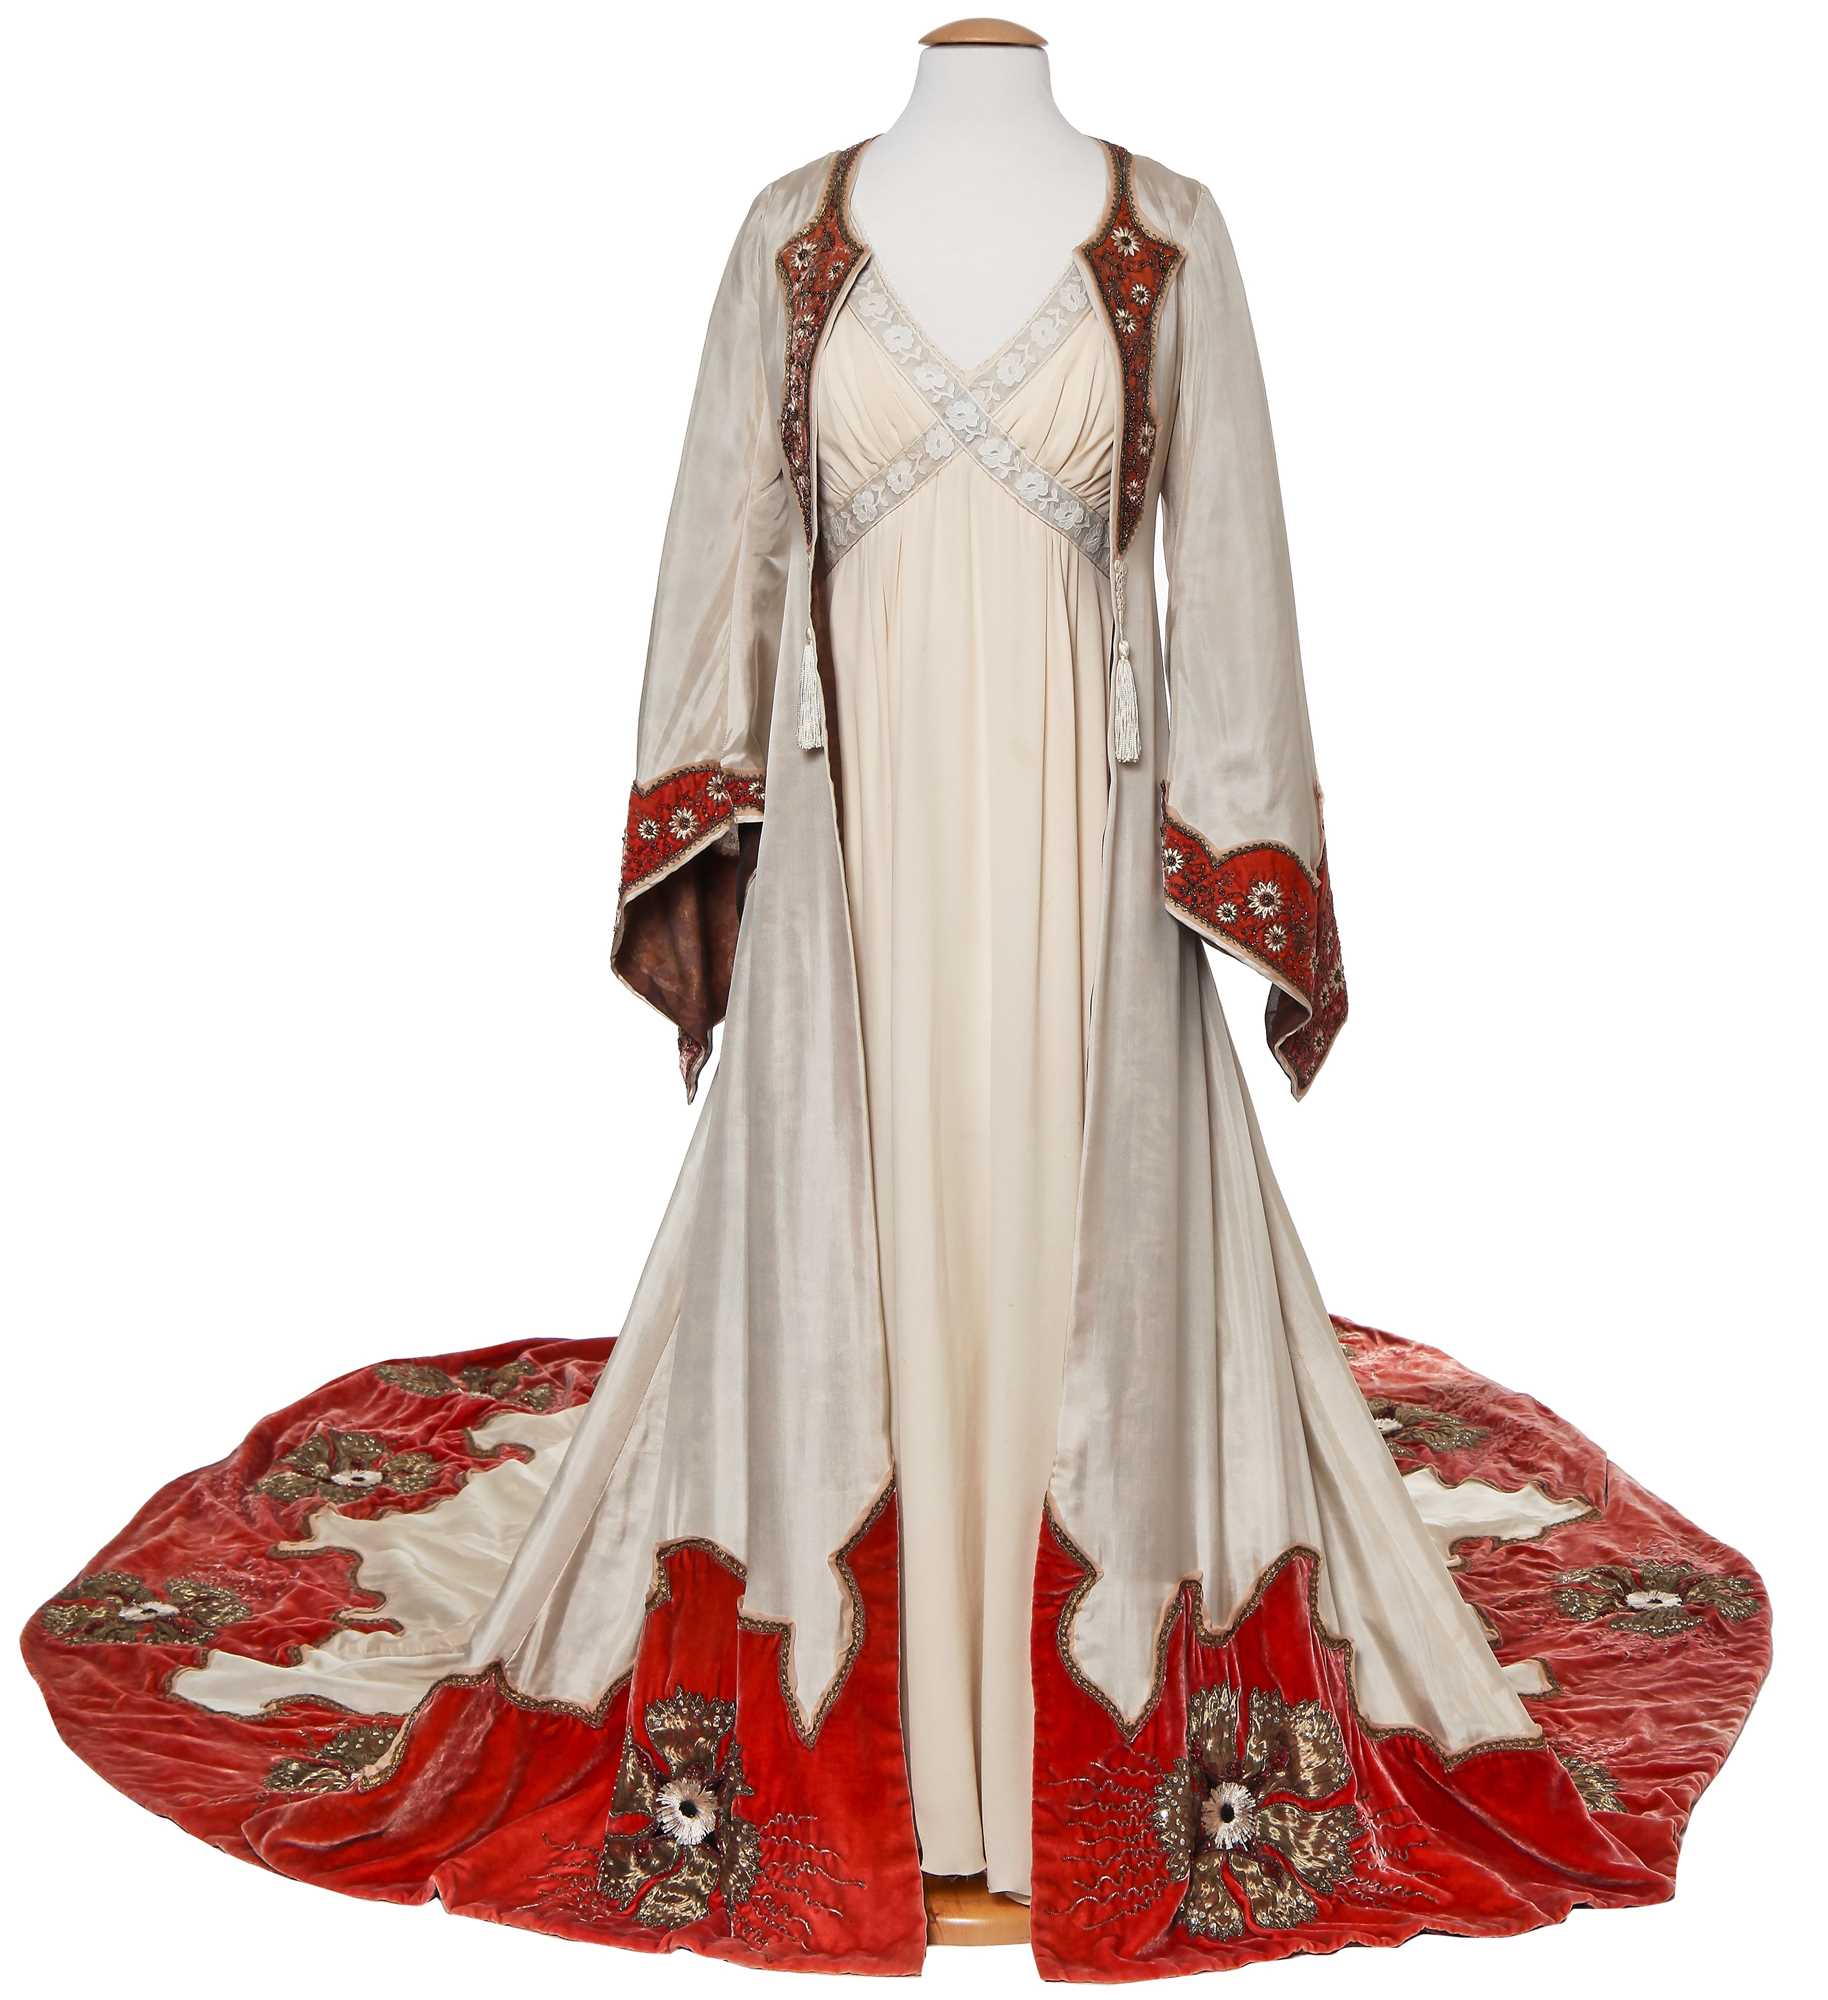 Lot 30 - Kate Winslet's costume as Sylvia Llewelyn Davies in the film 'Finding Neverland', 2004